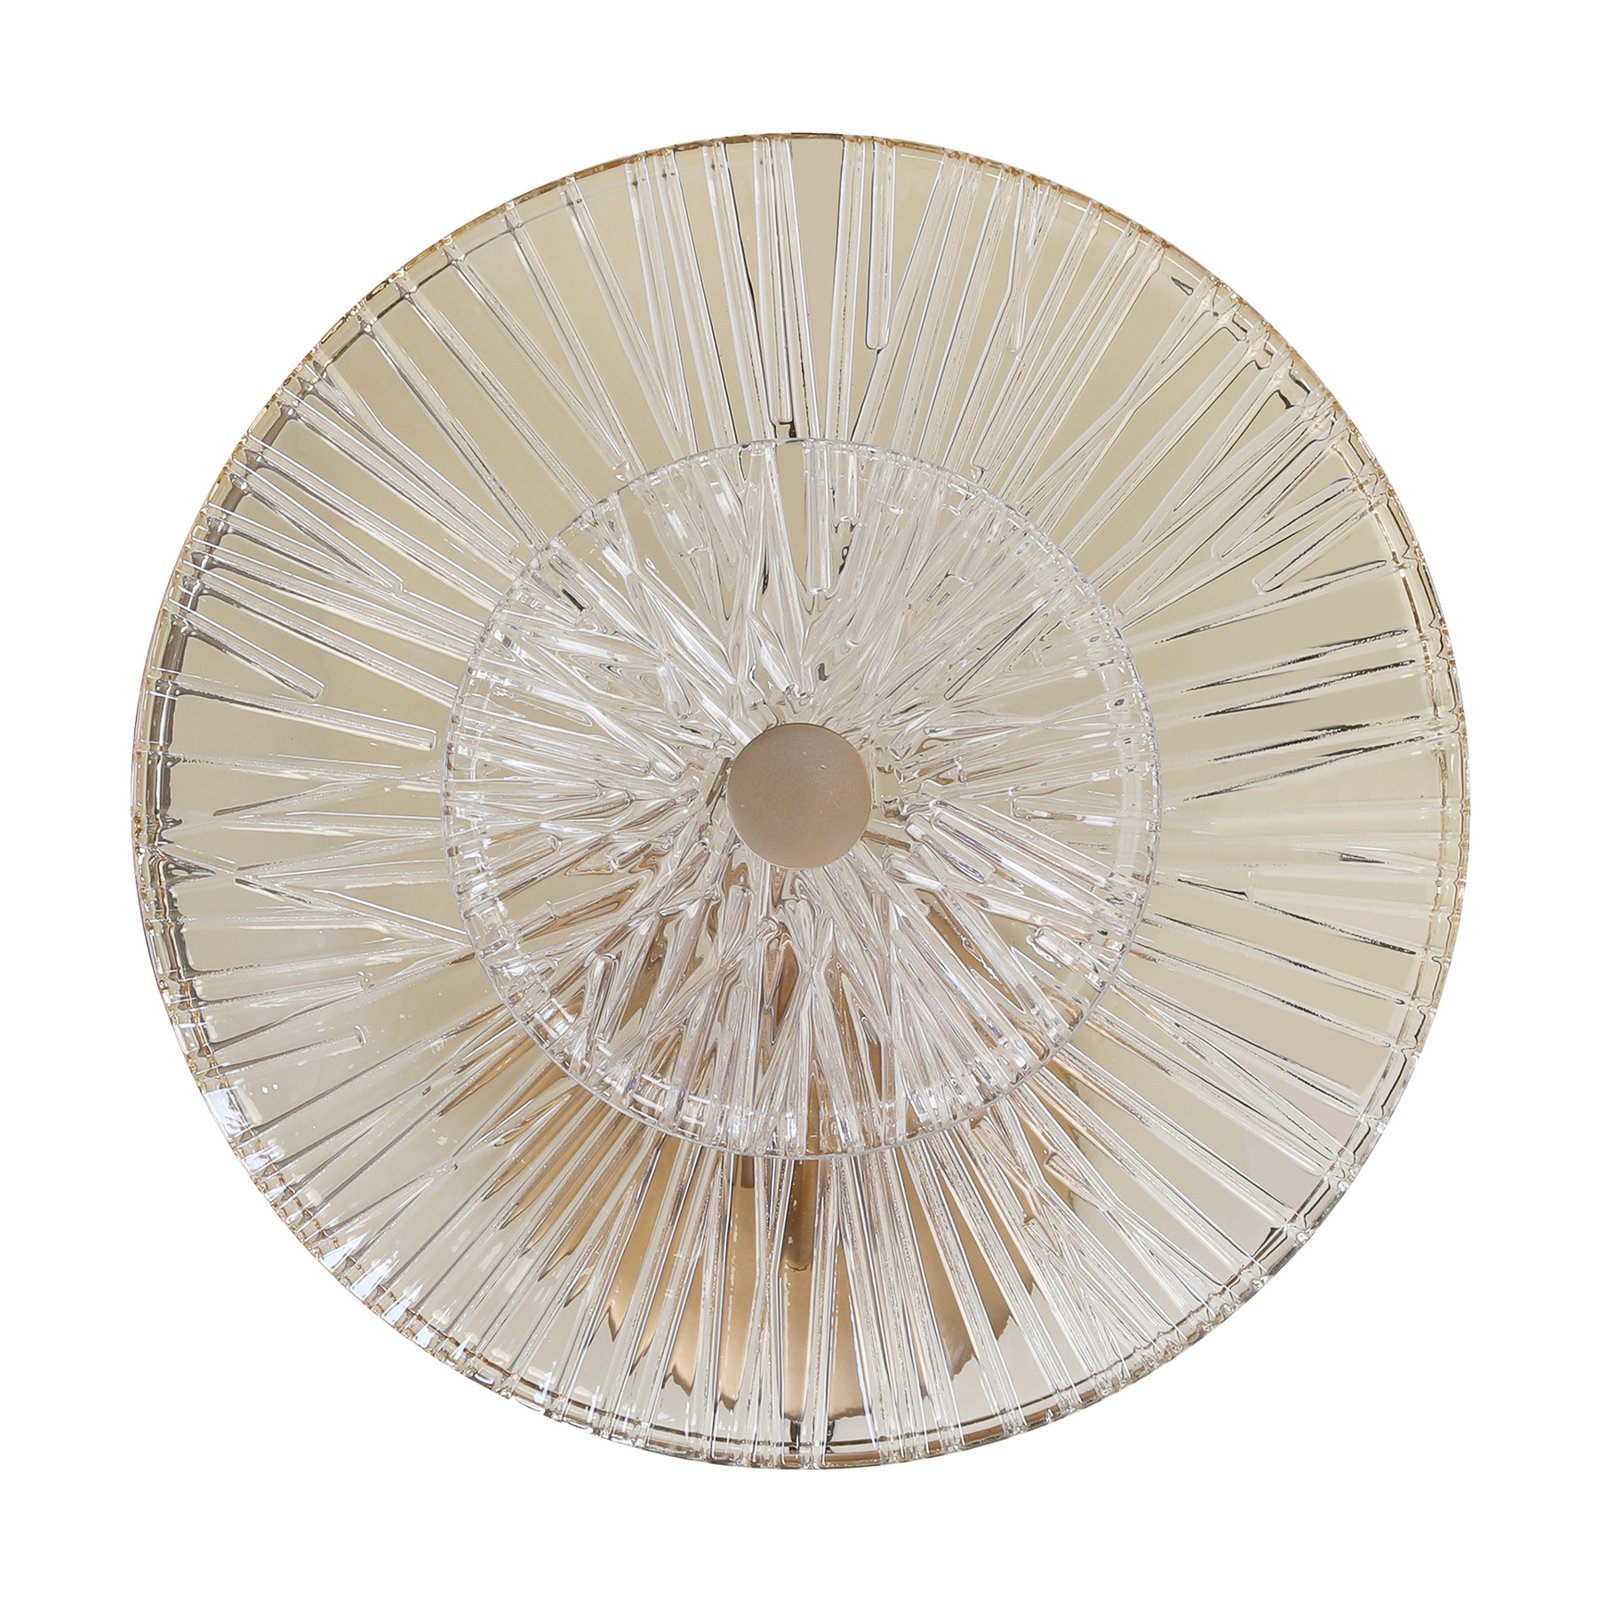 Maytoni Aster wall lamp made of pressed glass